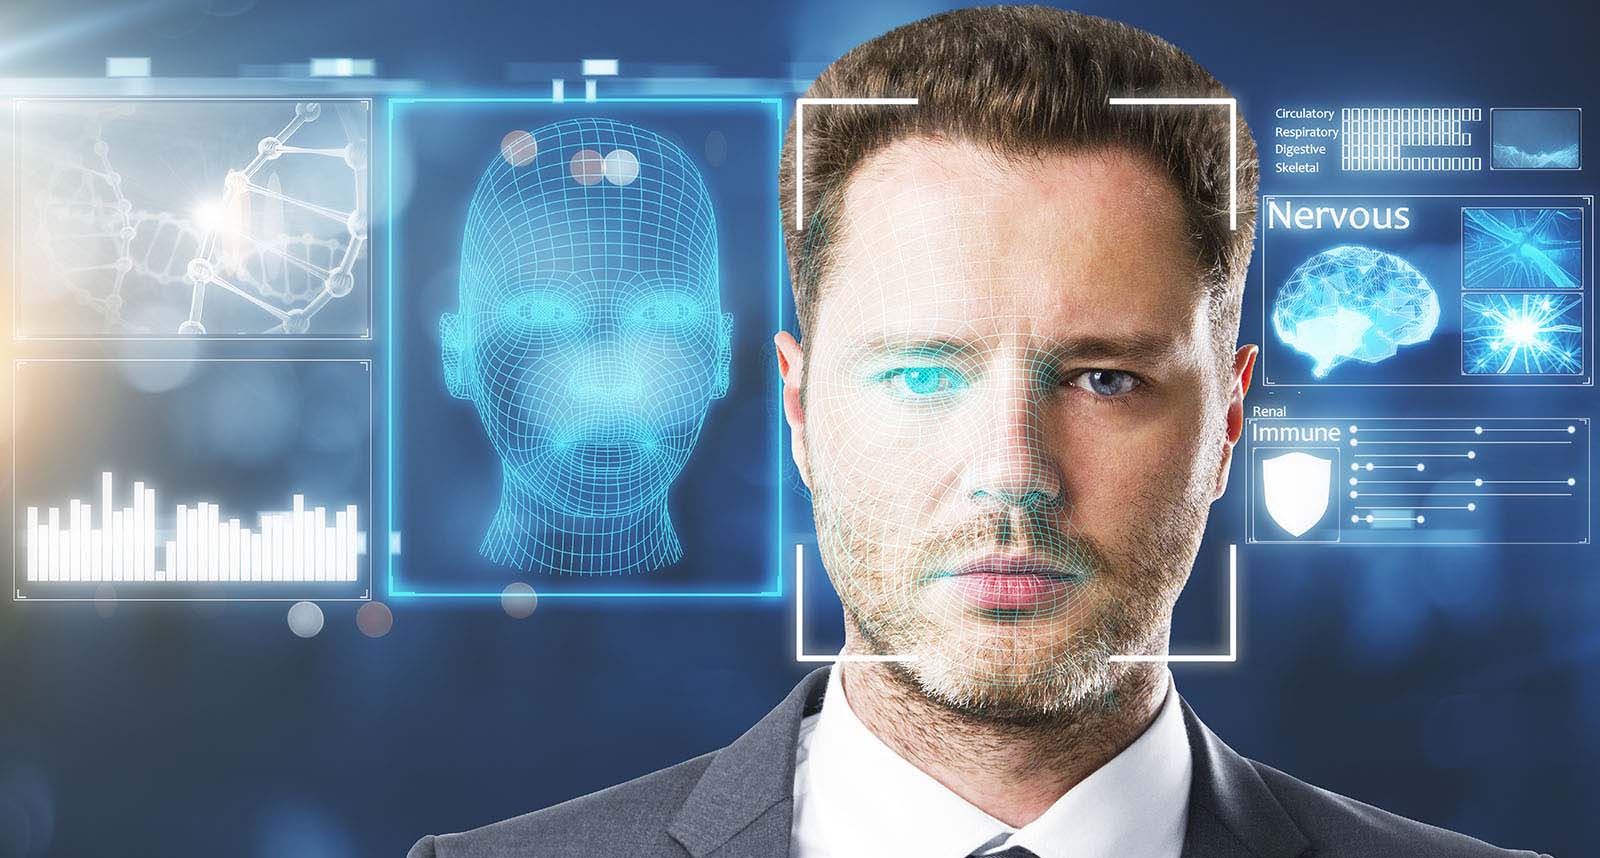 Uses of Facial Recognition